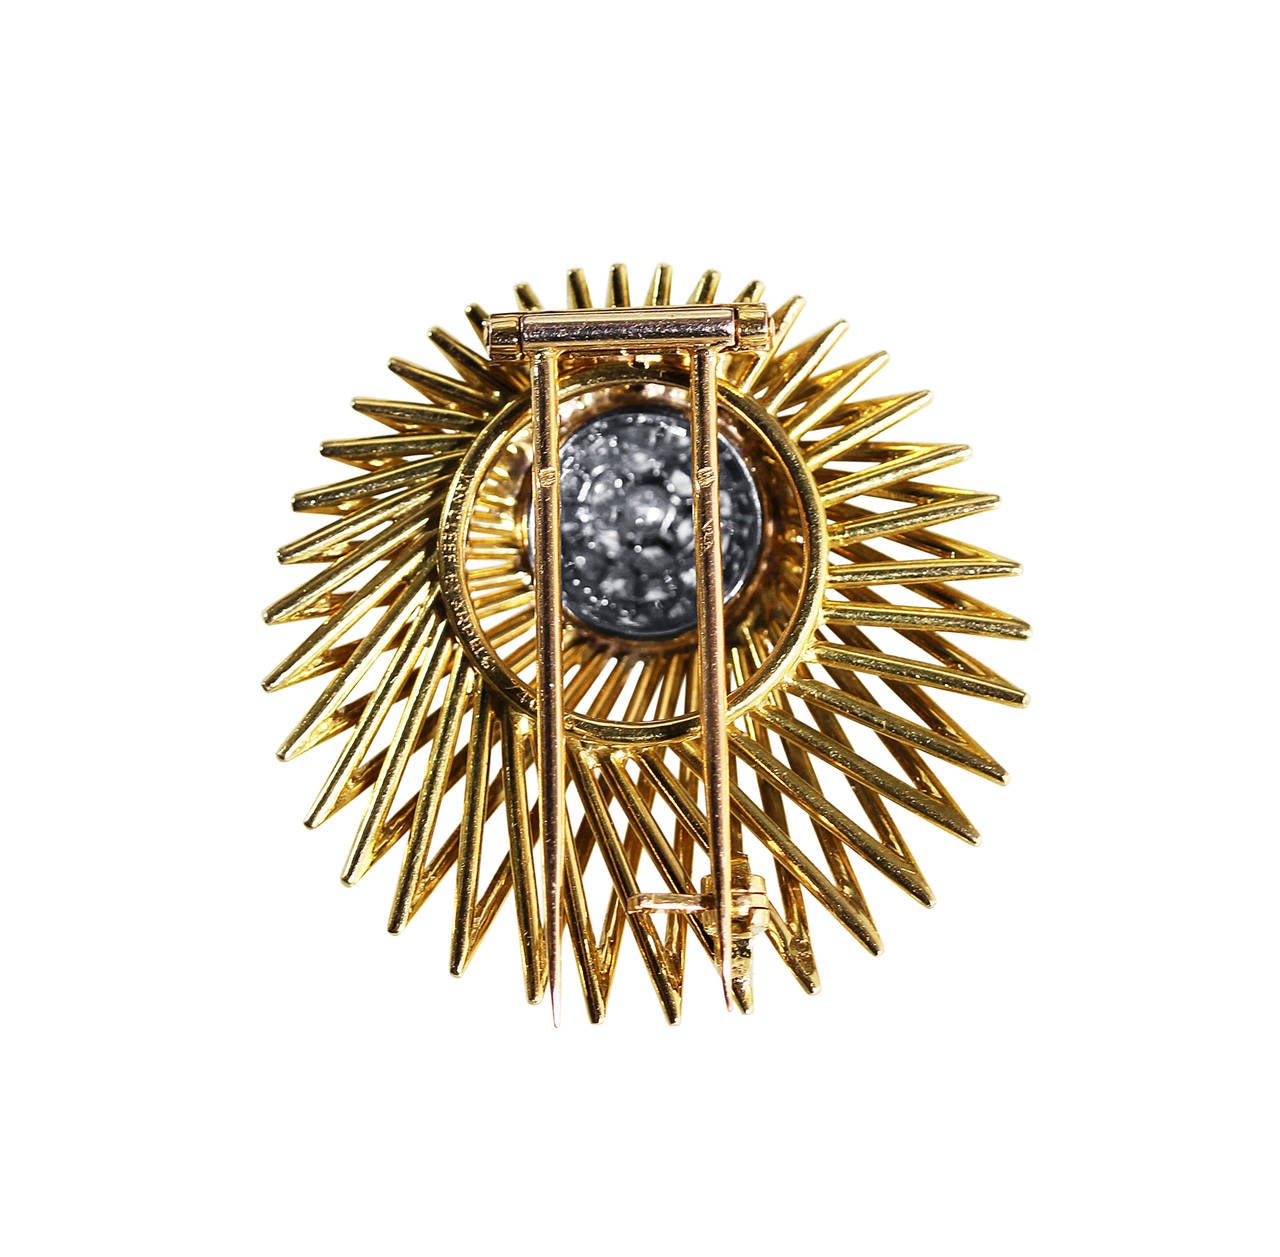 An 18 karat yellow gold, platinum and diamond 'Meteor' brooch by Van Cleef & Arpels, France, circa 1970, designed as a sunburst of polished gold tendrils set in the center with a bombe plaque set with 37 round diamonds weighing approximately 2.25